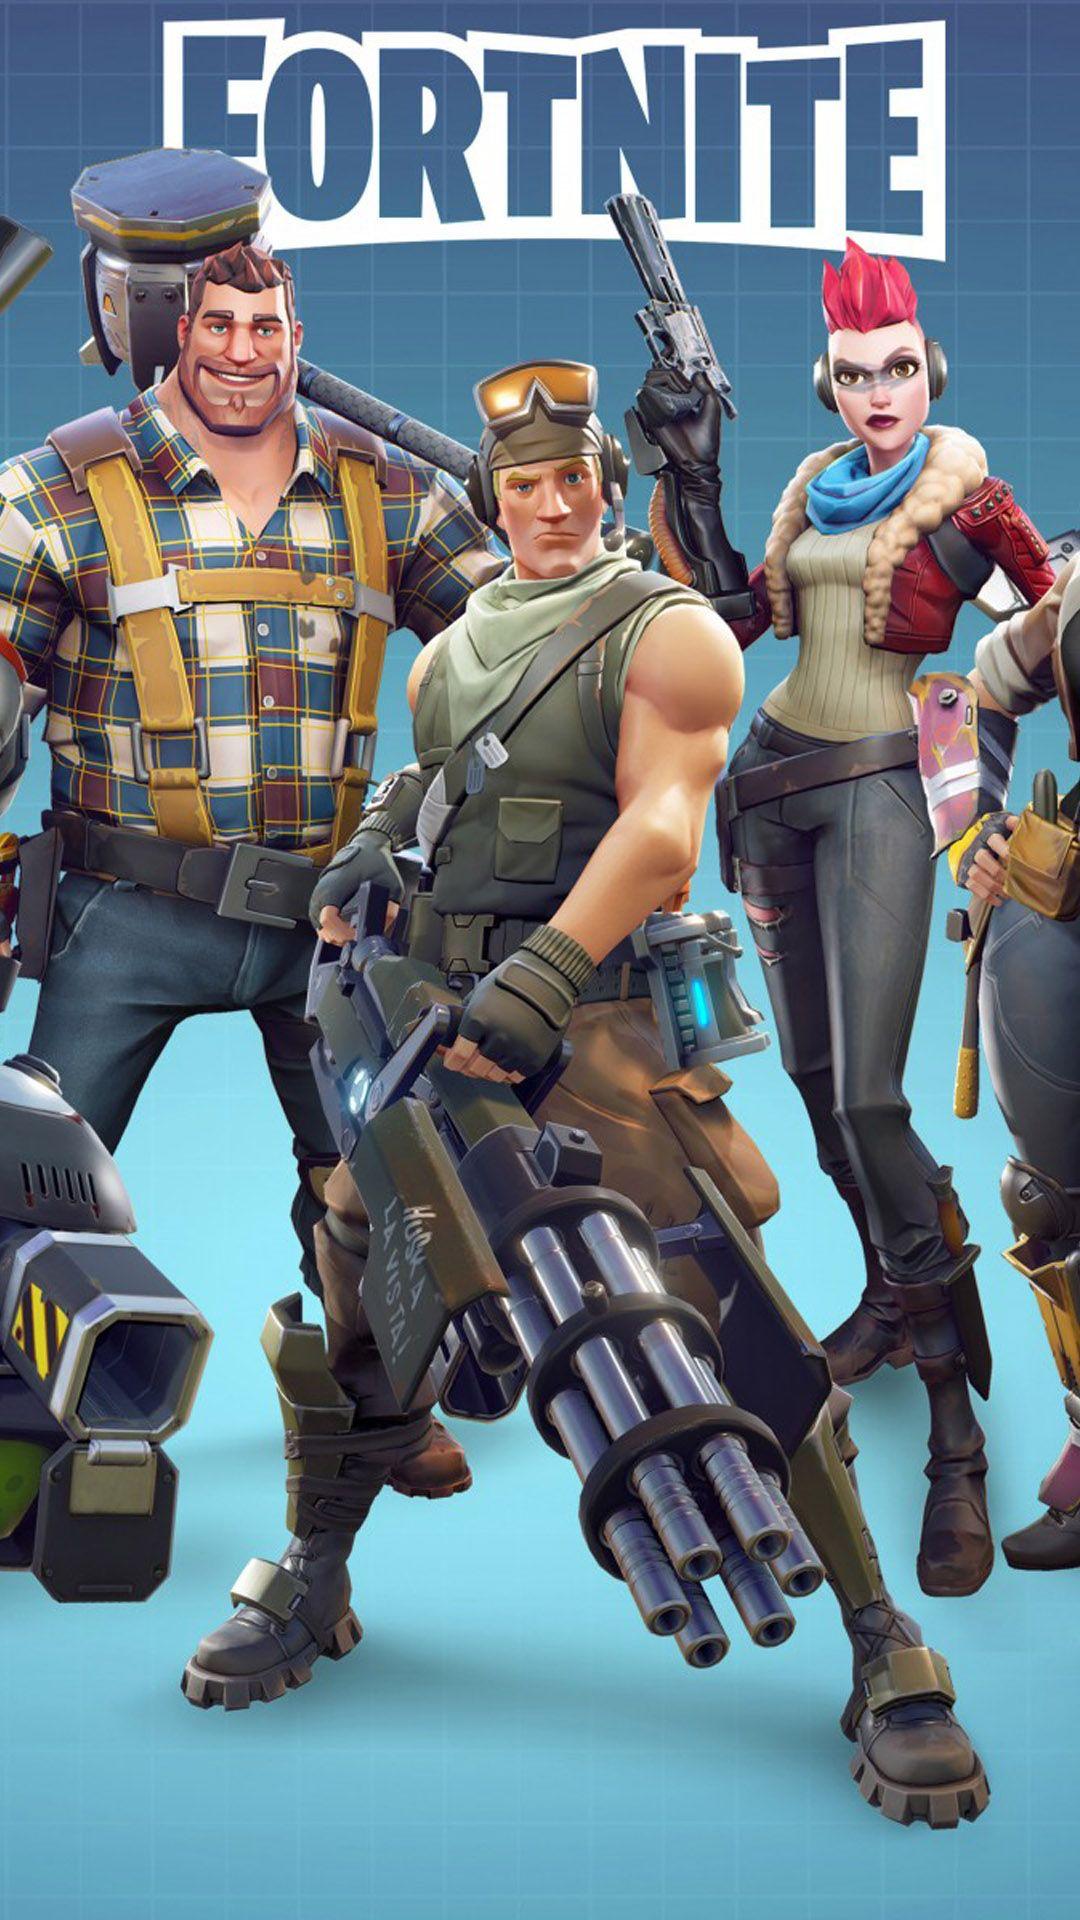 Fortnite Iphone Wallpapers Top Free Fortnite Iphone Backgrounds Wallpaperaccess